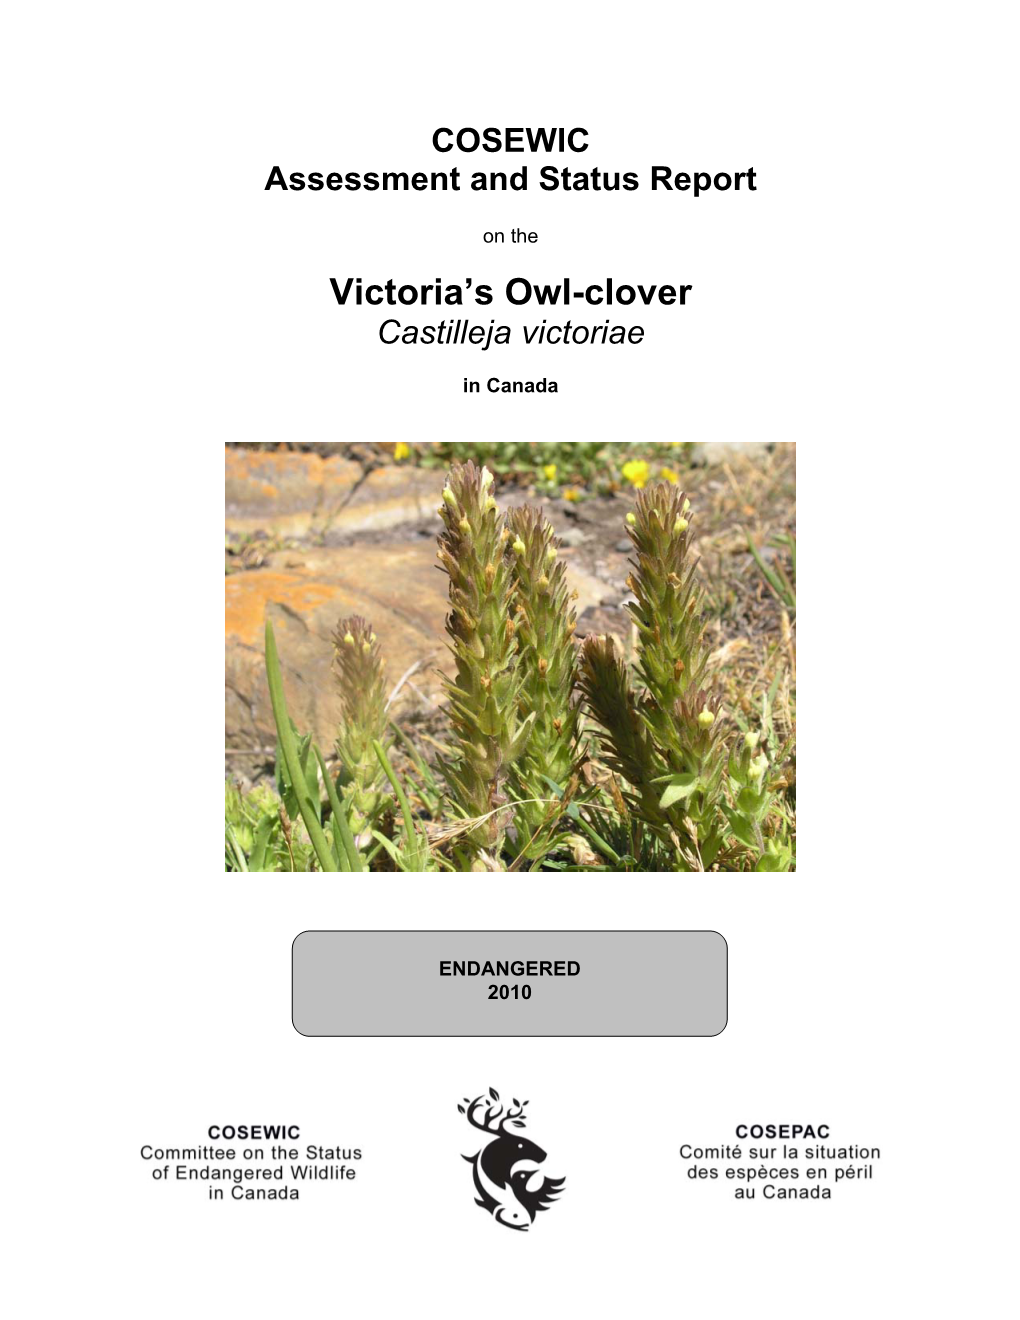 COSEWIC Assessment and Status Report on the Victoria Owl-Clover In